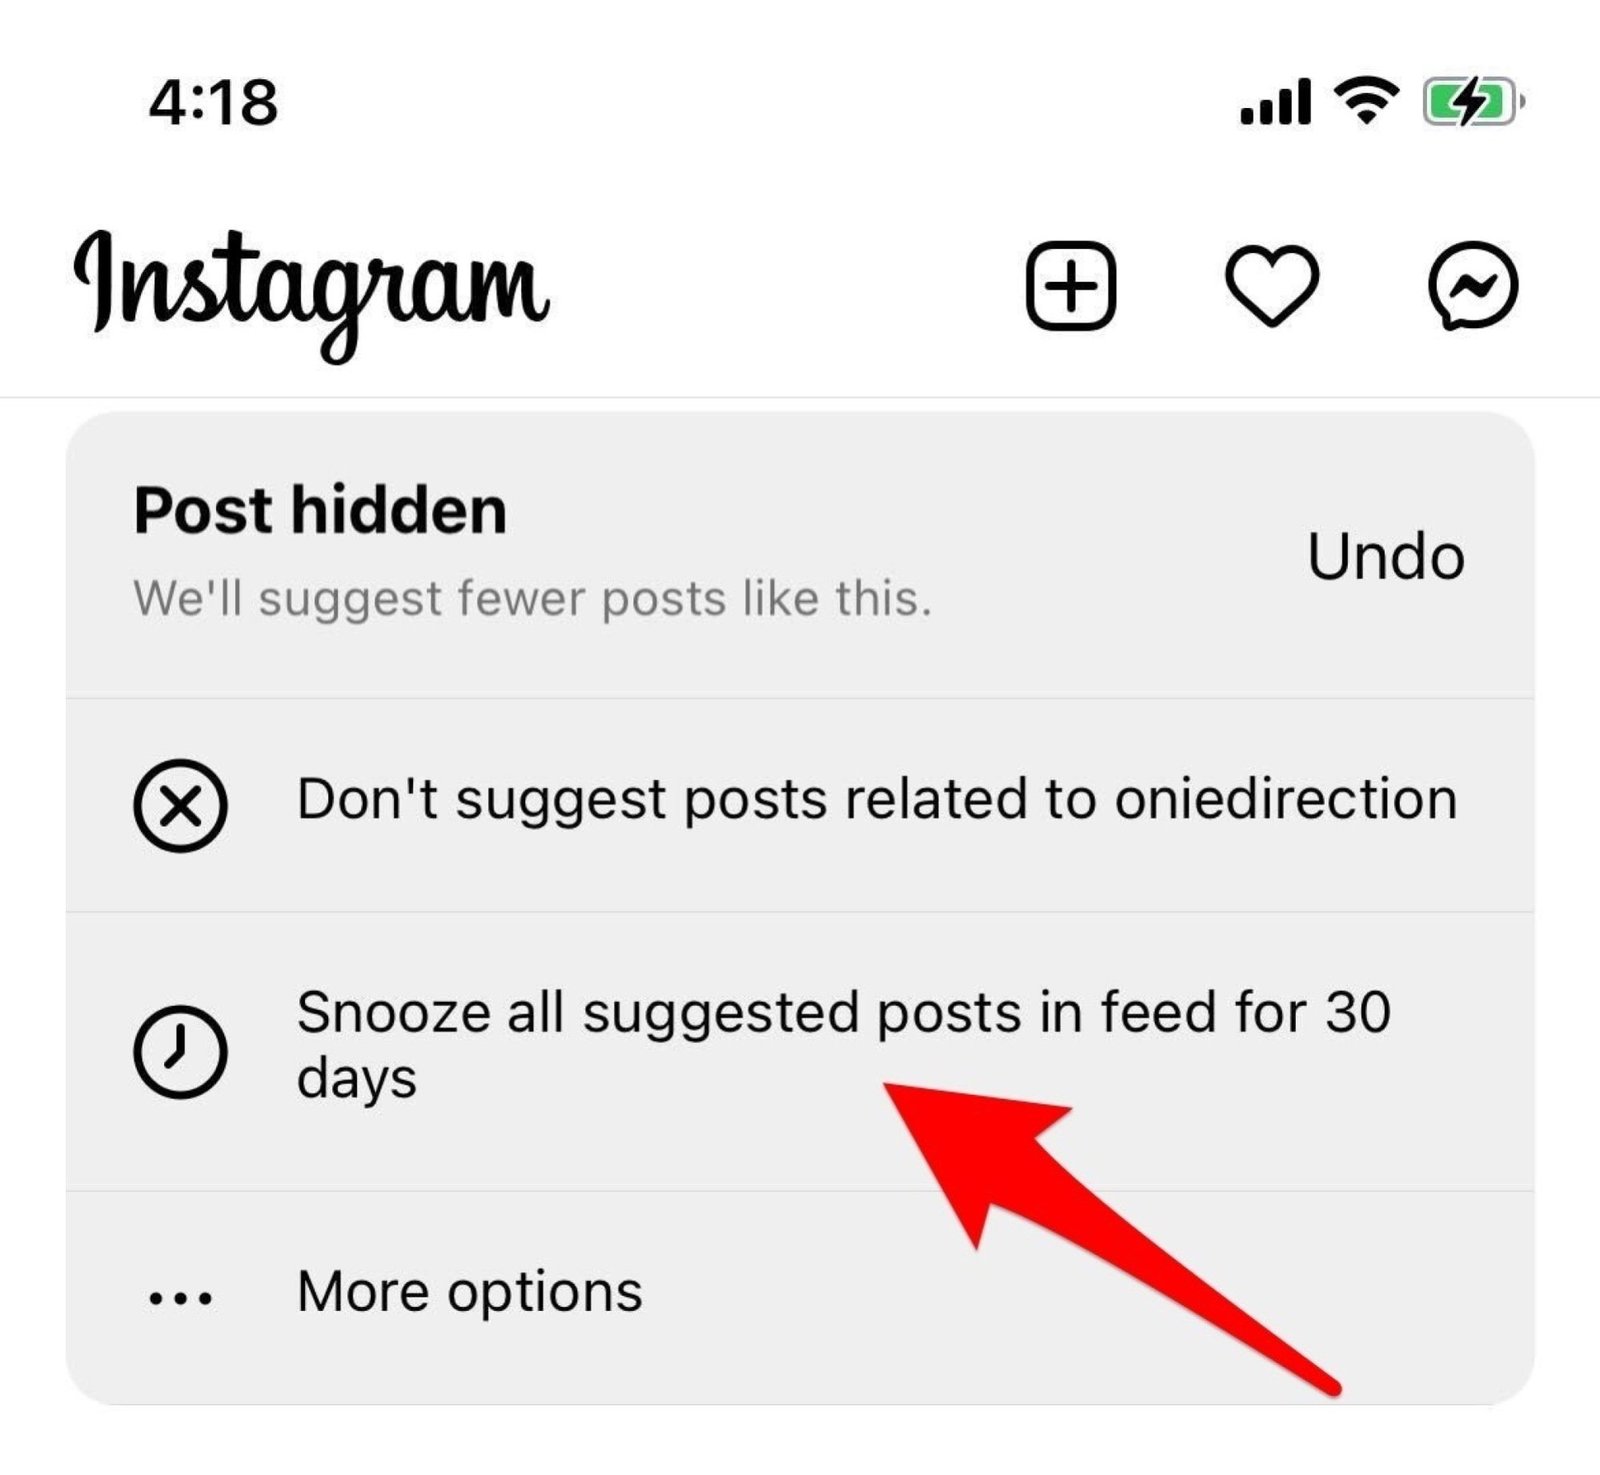 instagram screenshot red arrow pointing to option hide post in feed for 30 days